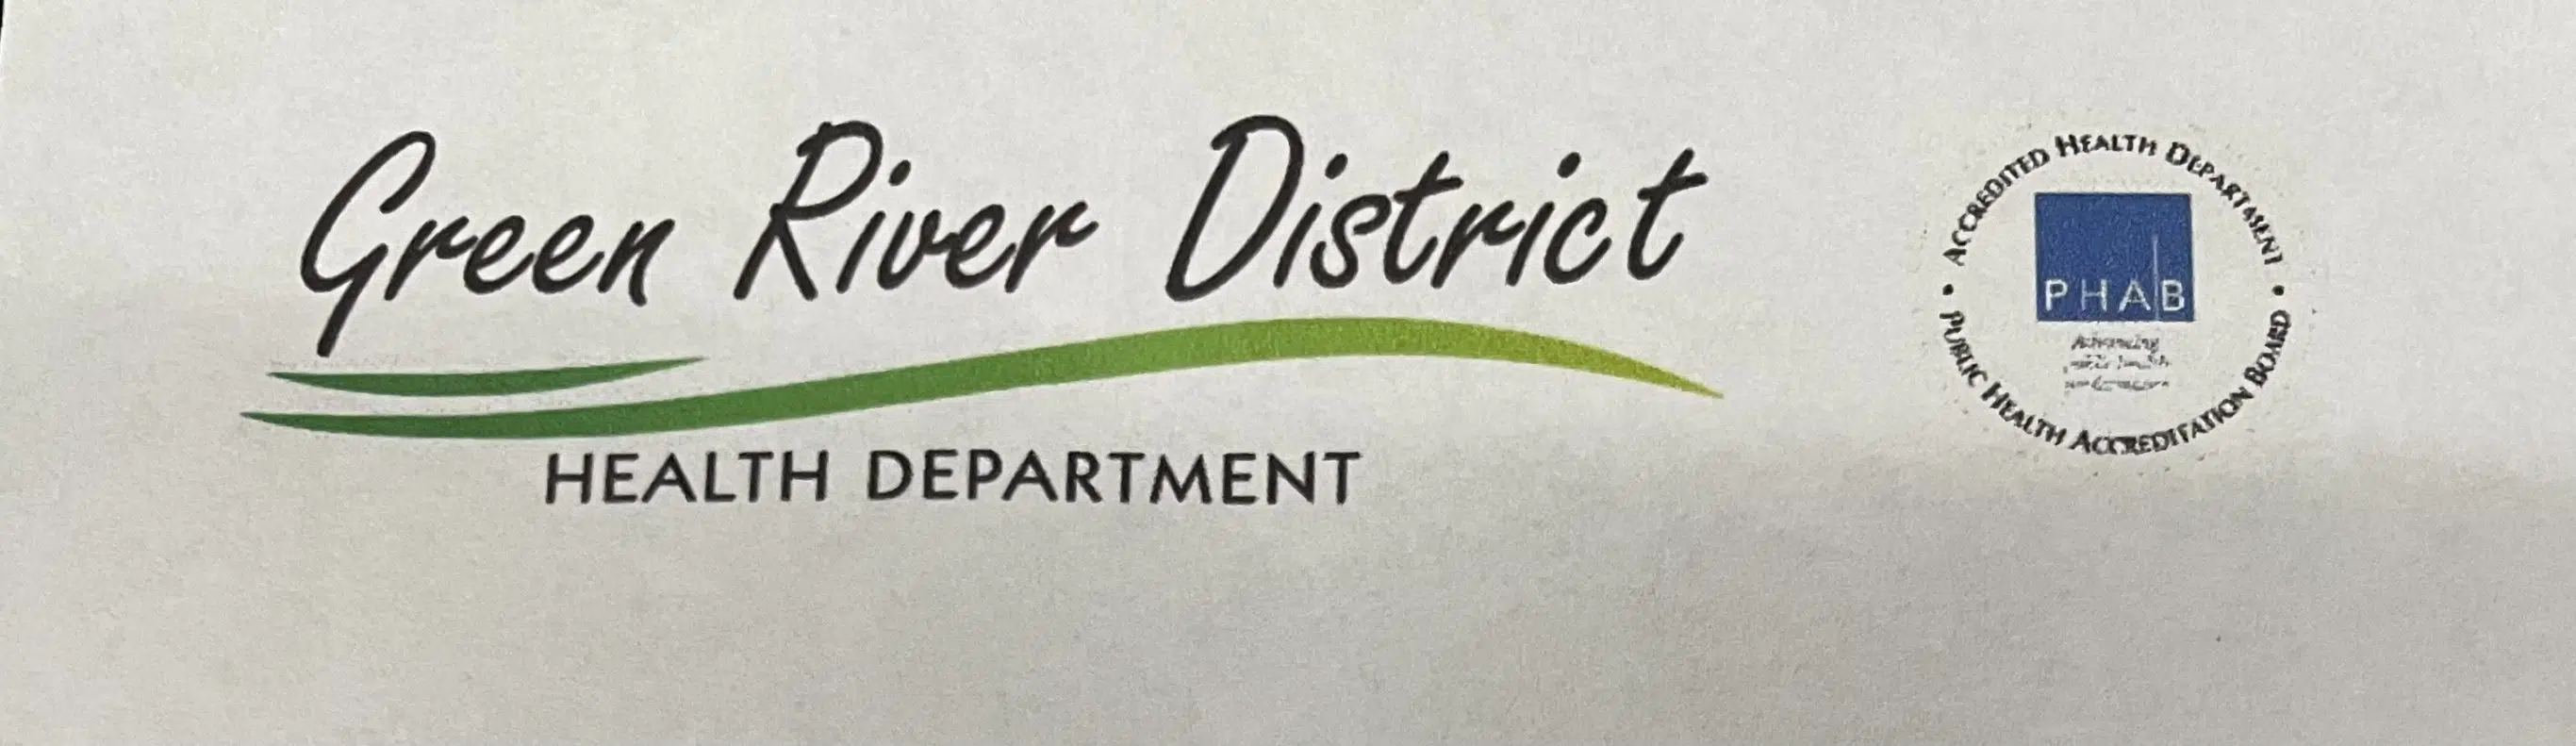 Green River District Health Department investigated 38 Covid-19 cases in Henderson County in May